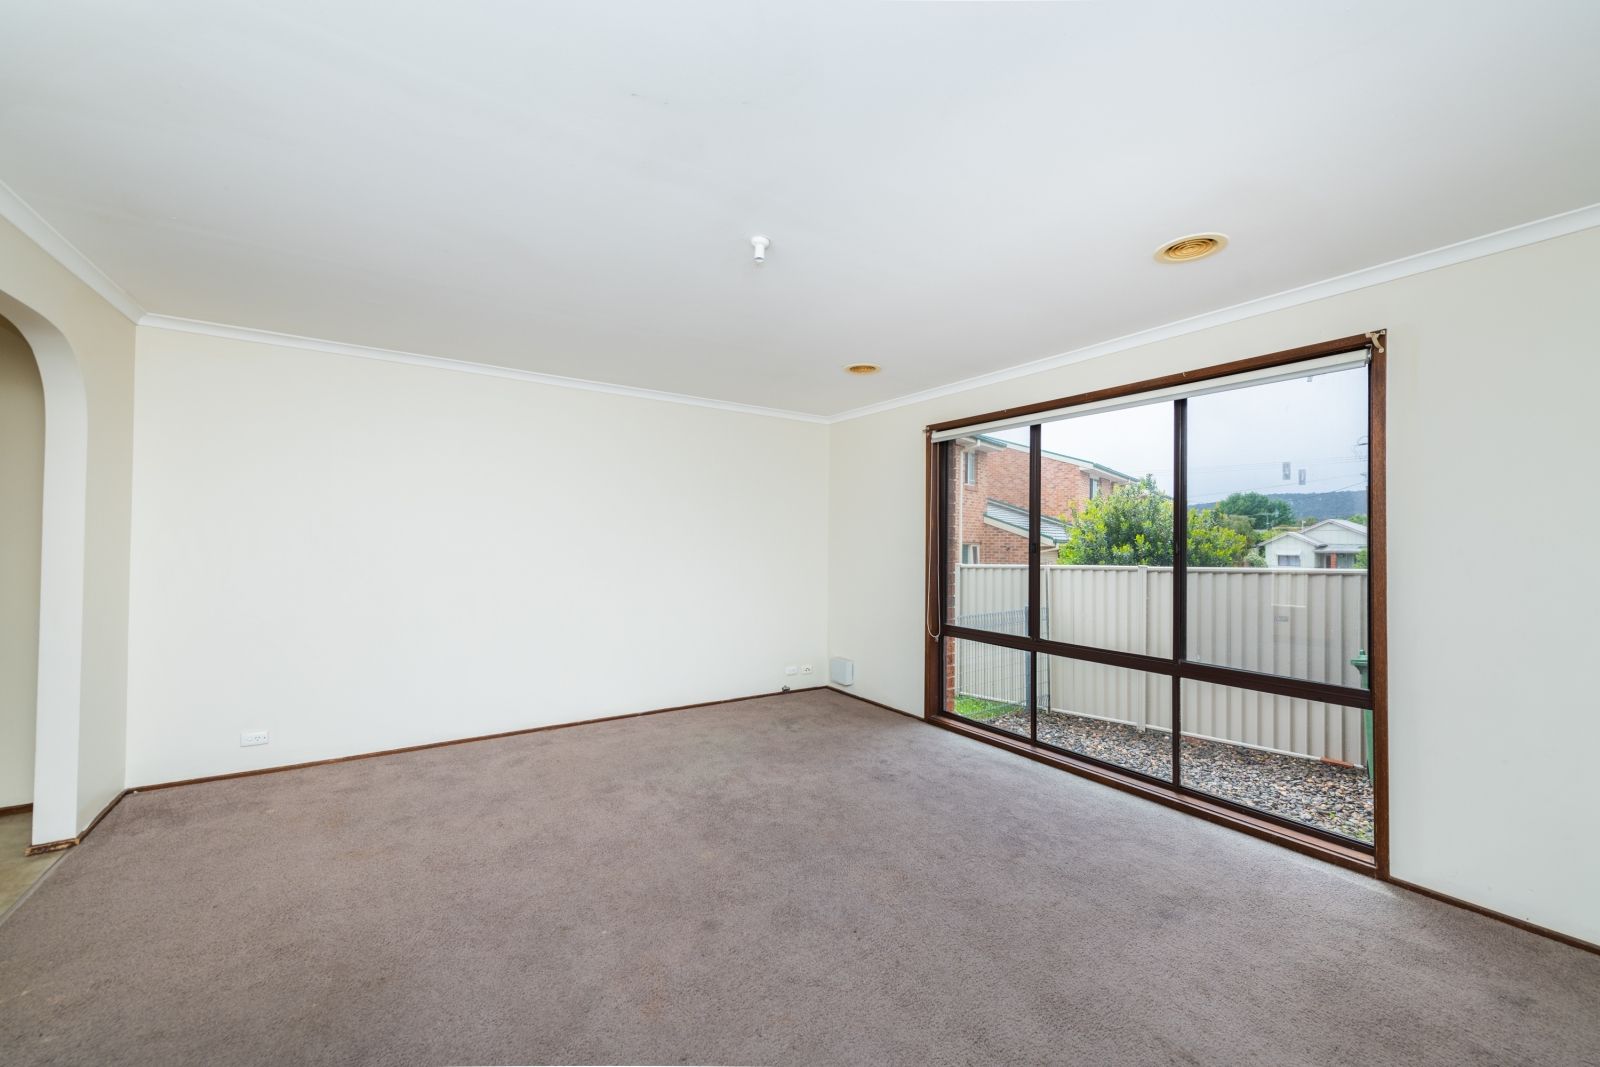 2/55 Cooma Street, Queanbeyan NSW 2620, Image 1